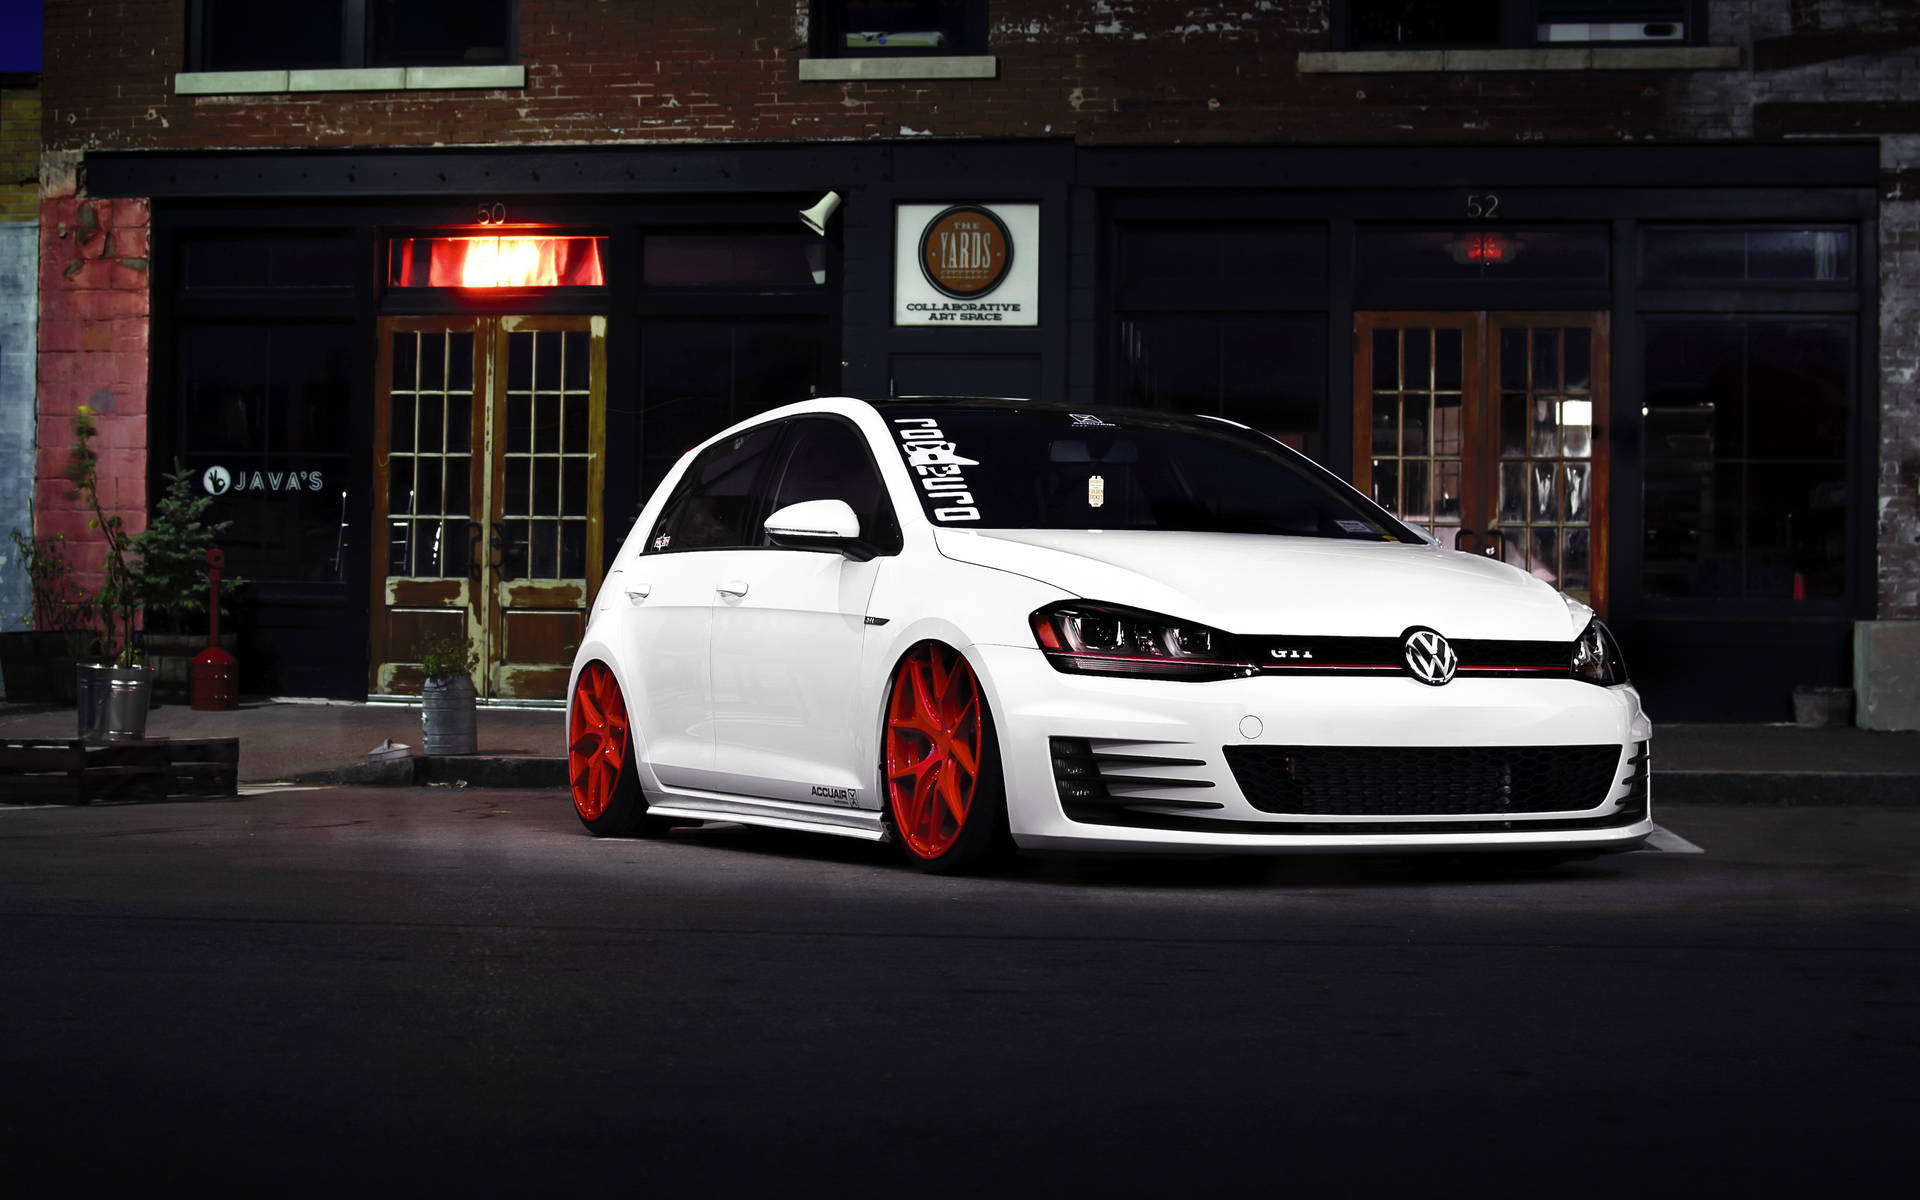 Show Off Your Style with the Volkswagen GTI Wallpaper